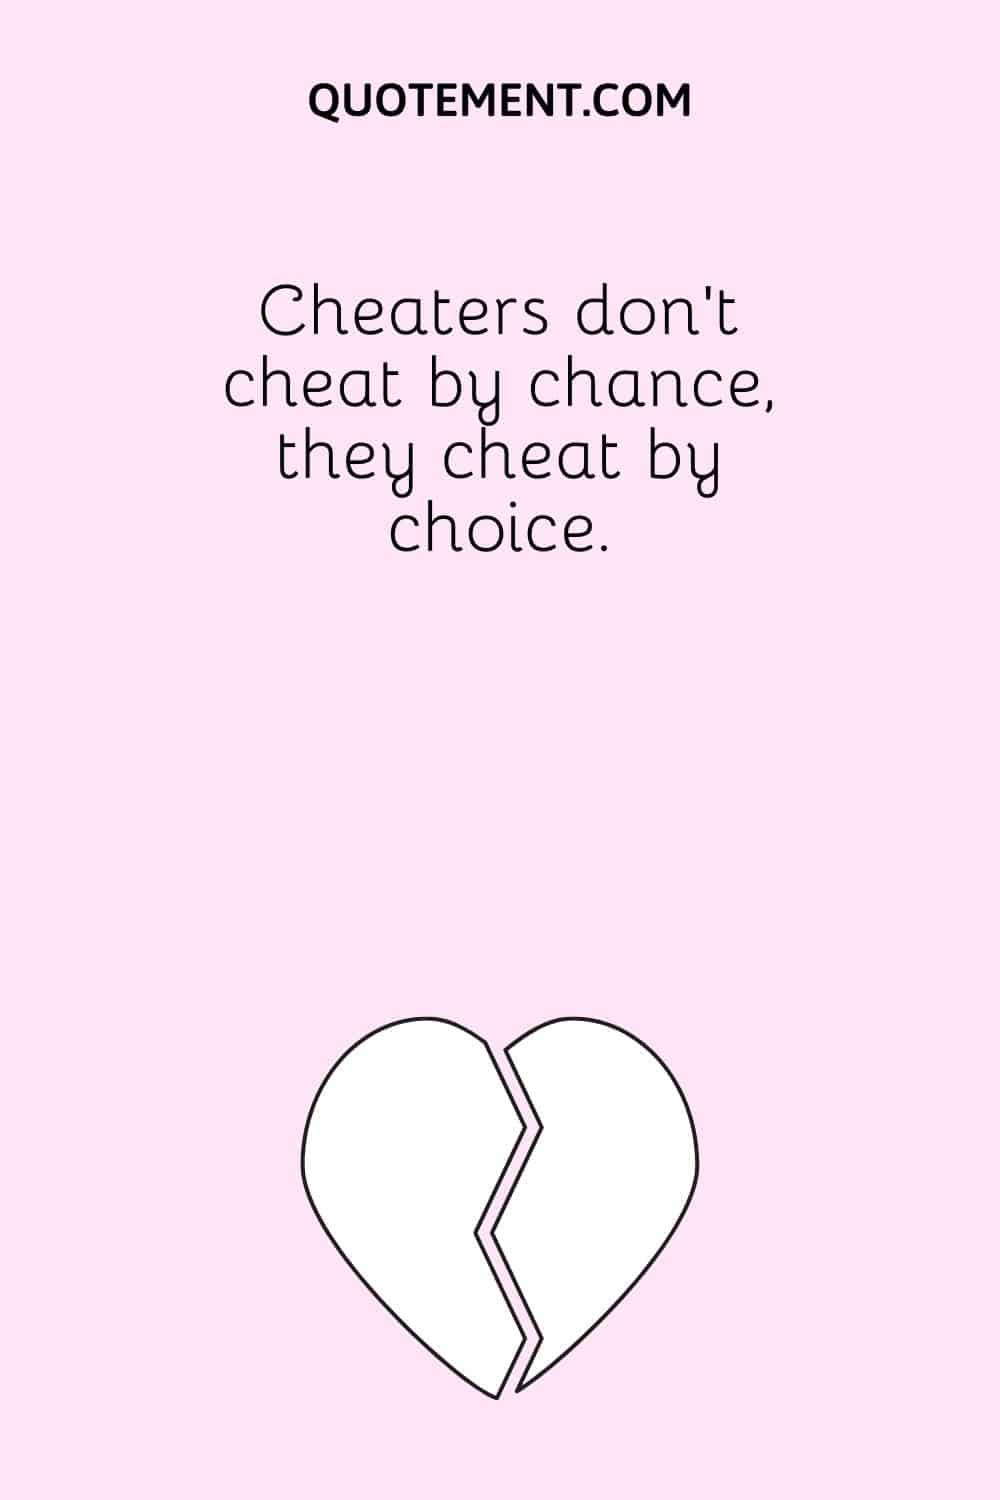 Cheaters don’t cheat by chance, they cheat by choice.